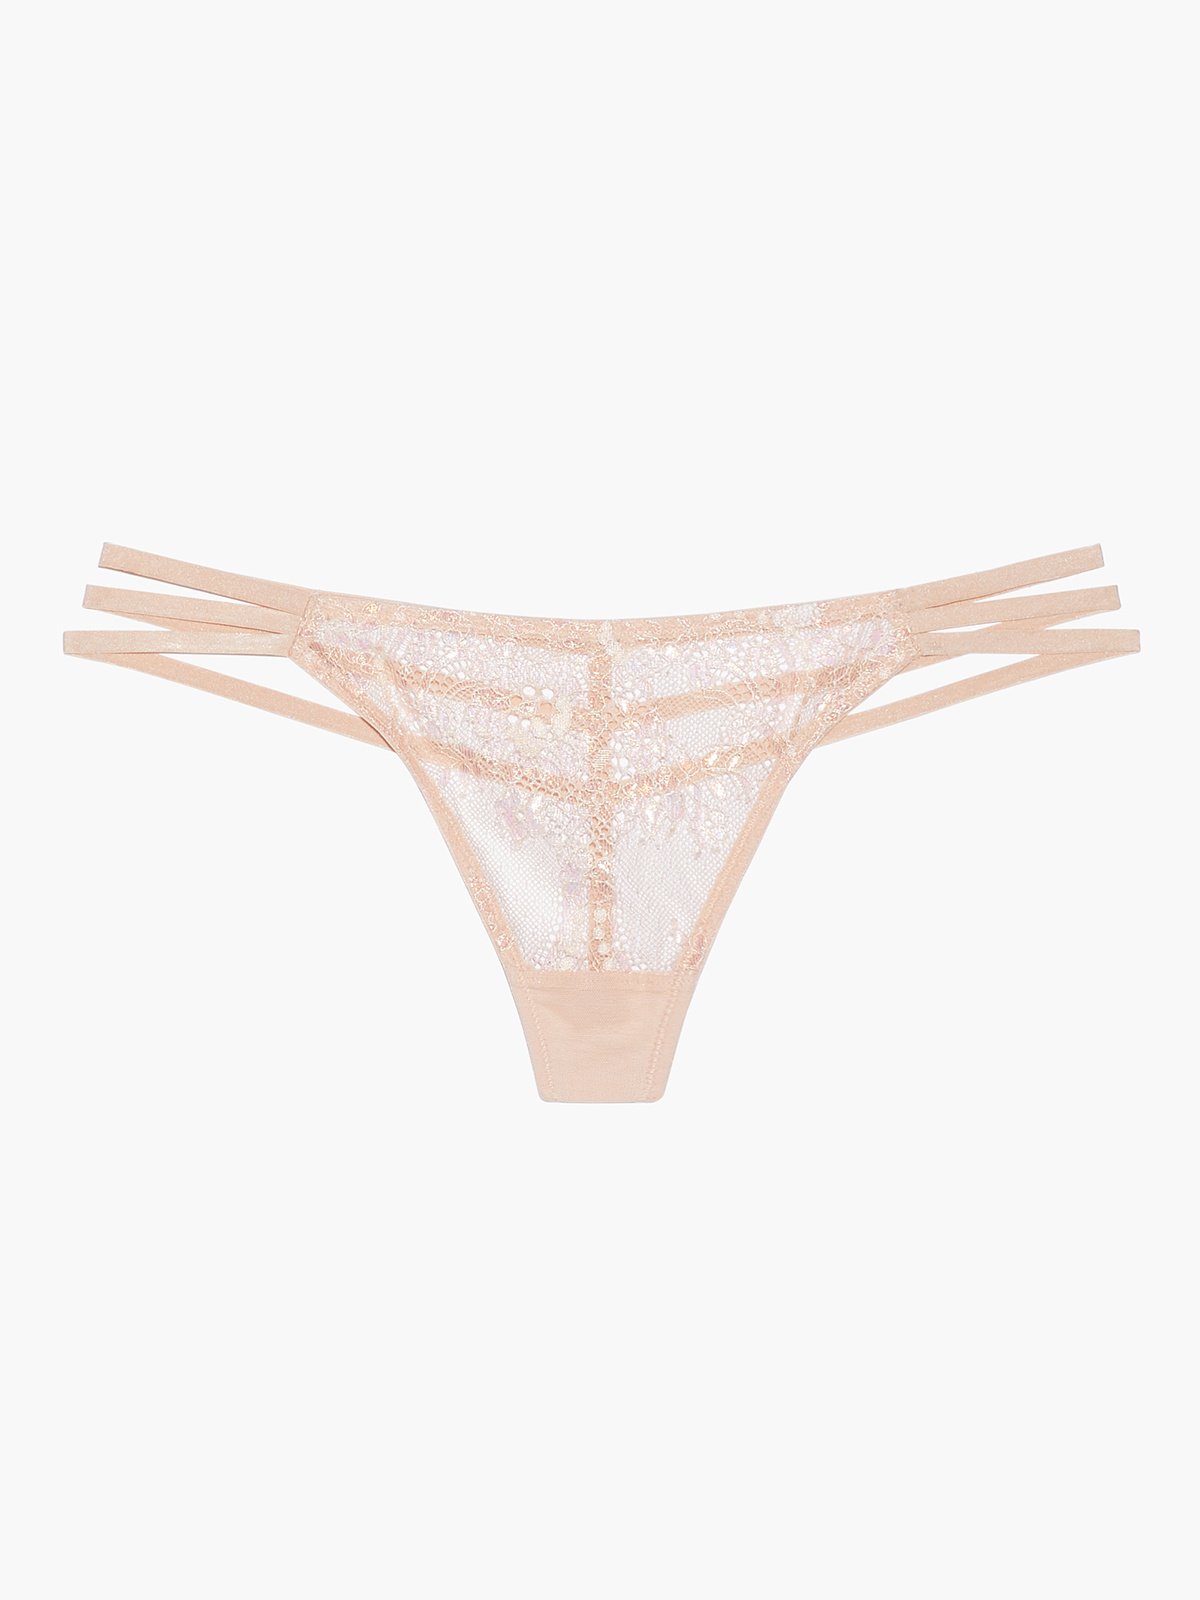 https://cdn.savagex.com/media/images/products/UD2042855-7217/HYPER-REAL-METALLIC-LACE-STRAPPY-G-STRING-UD2042855-7217-LAYDOWN-1200x1600.jpg